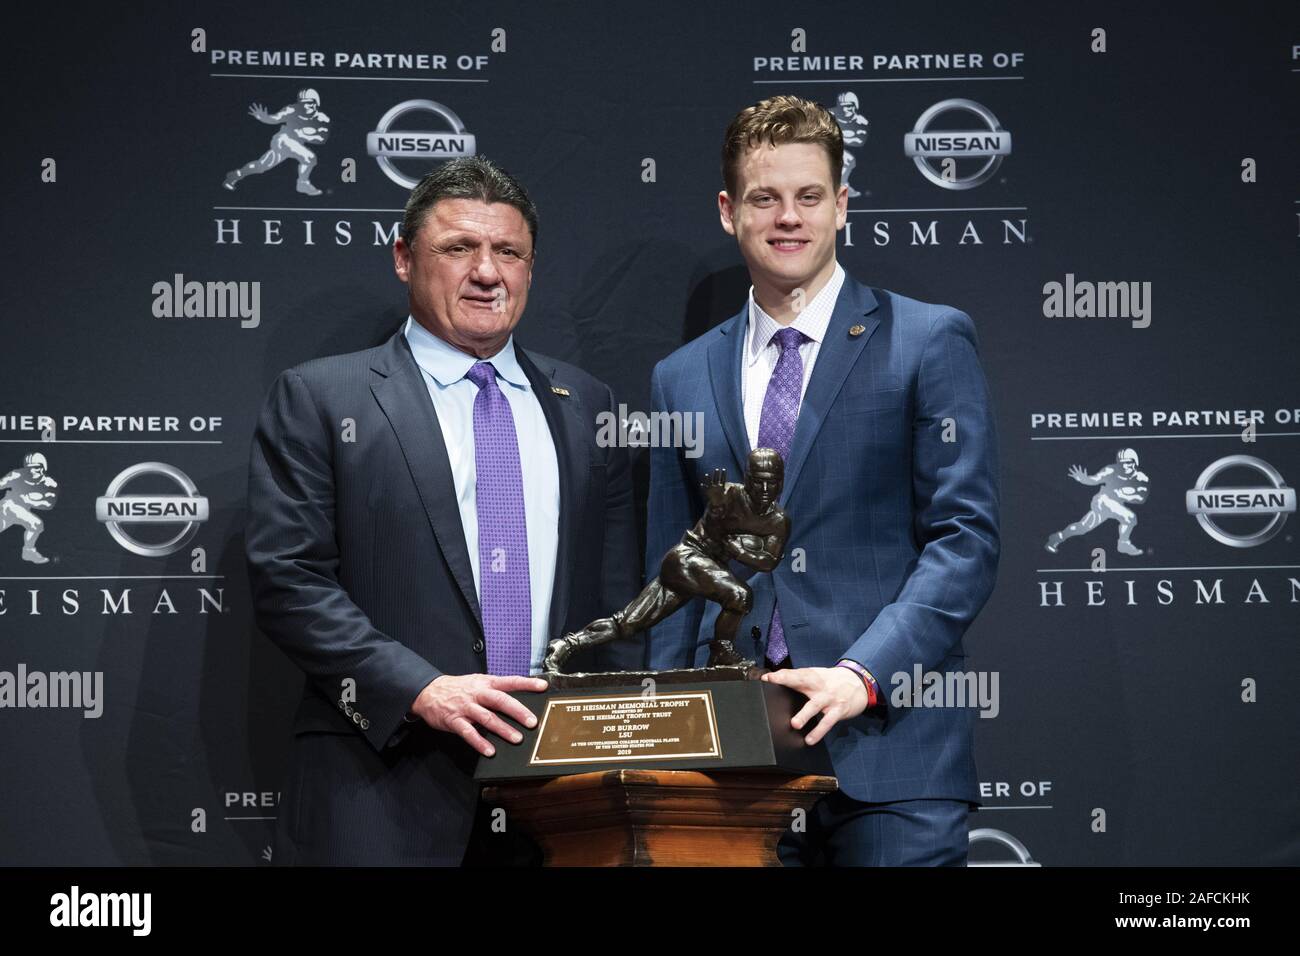 New York, United States. 14th Dec, 2019. LSU quarterback Joe Burrow, right, and head coach Ed Orgeron pose for a photo after Burrow wins the 2019 Heisman Trophy Award at the Marriott Marquis in New York City on Saturday, December 14, 2019. The other three finalists for the trophy were Ohio State quarterback Justin Fields, Oklahoma quarterback Jalen Hurts and Ohio State defensive end Chase Young. Photo by Corey Sipkin/UPI Credit: UPI/Alamy Live News Stock Photo